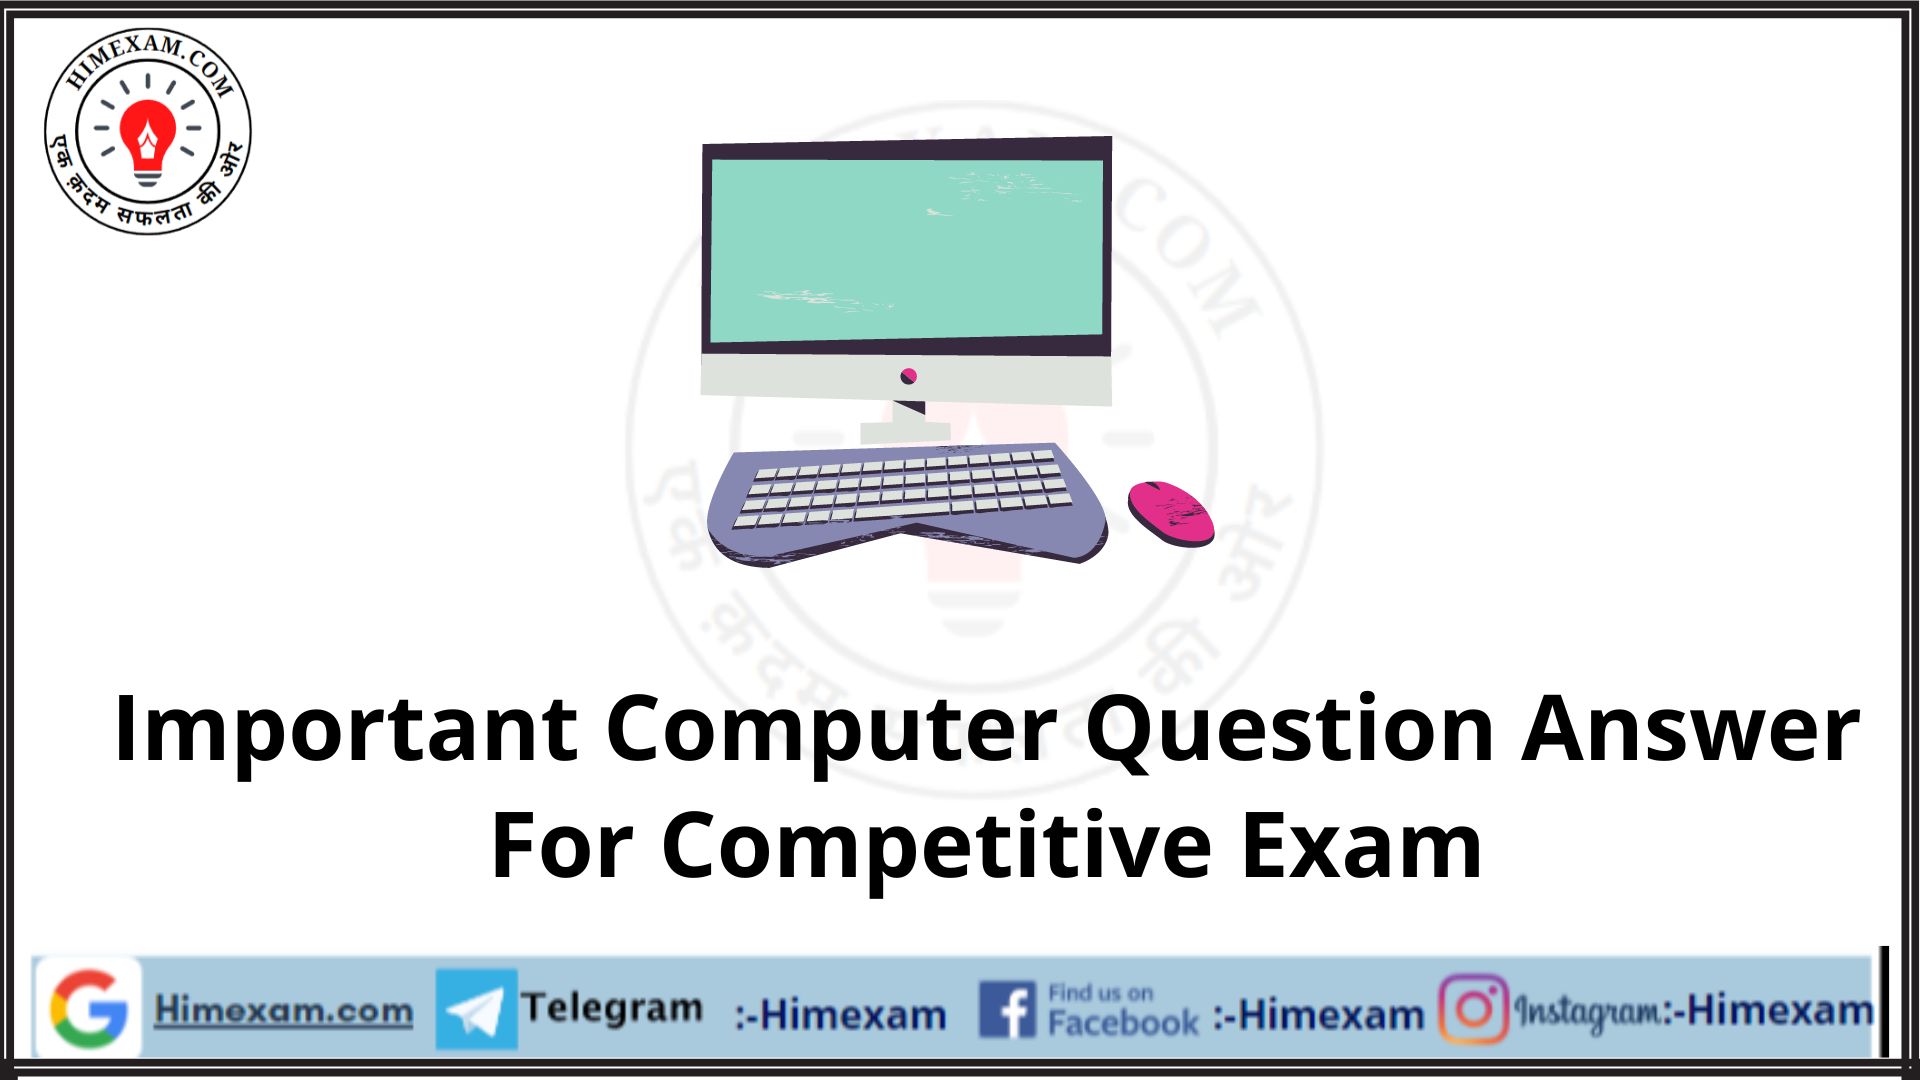 Important Computer Question Answer For Competitive Exam